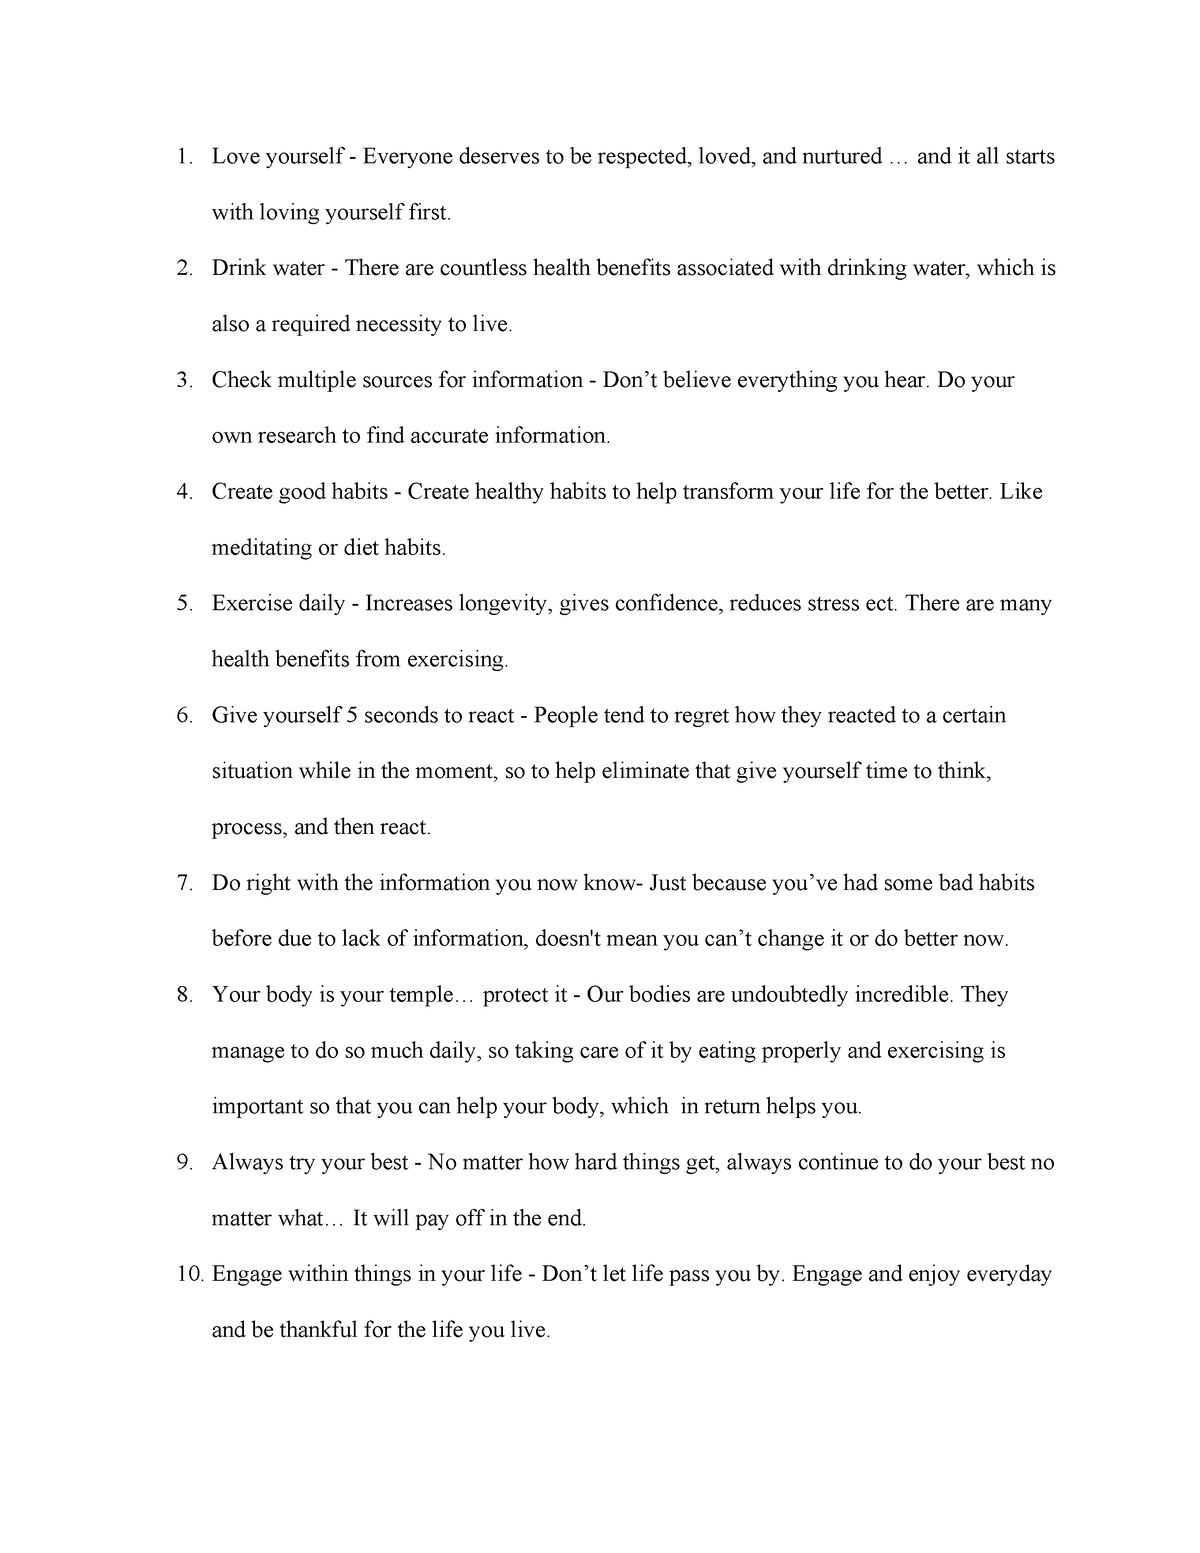 Untitled document - Things to consider when wanting a better life ...